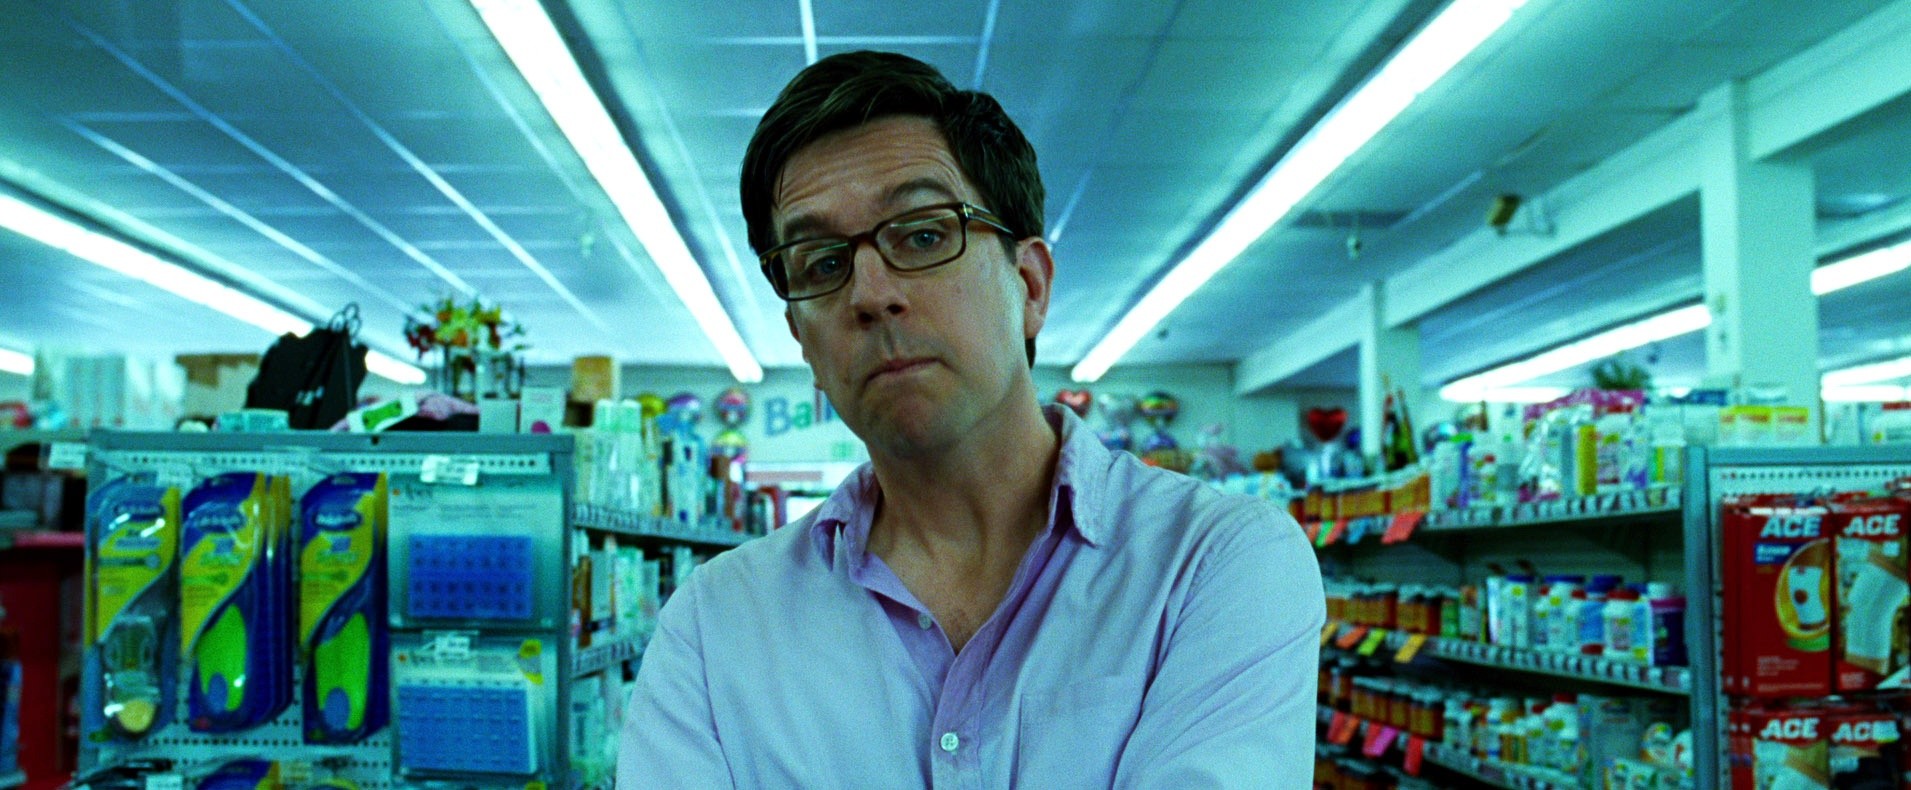 Ed Helms stars as Stu in Warner Bros. Pictures' The Hangover Part III (2013)